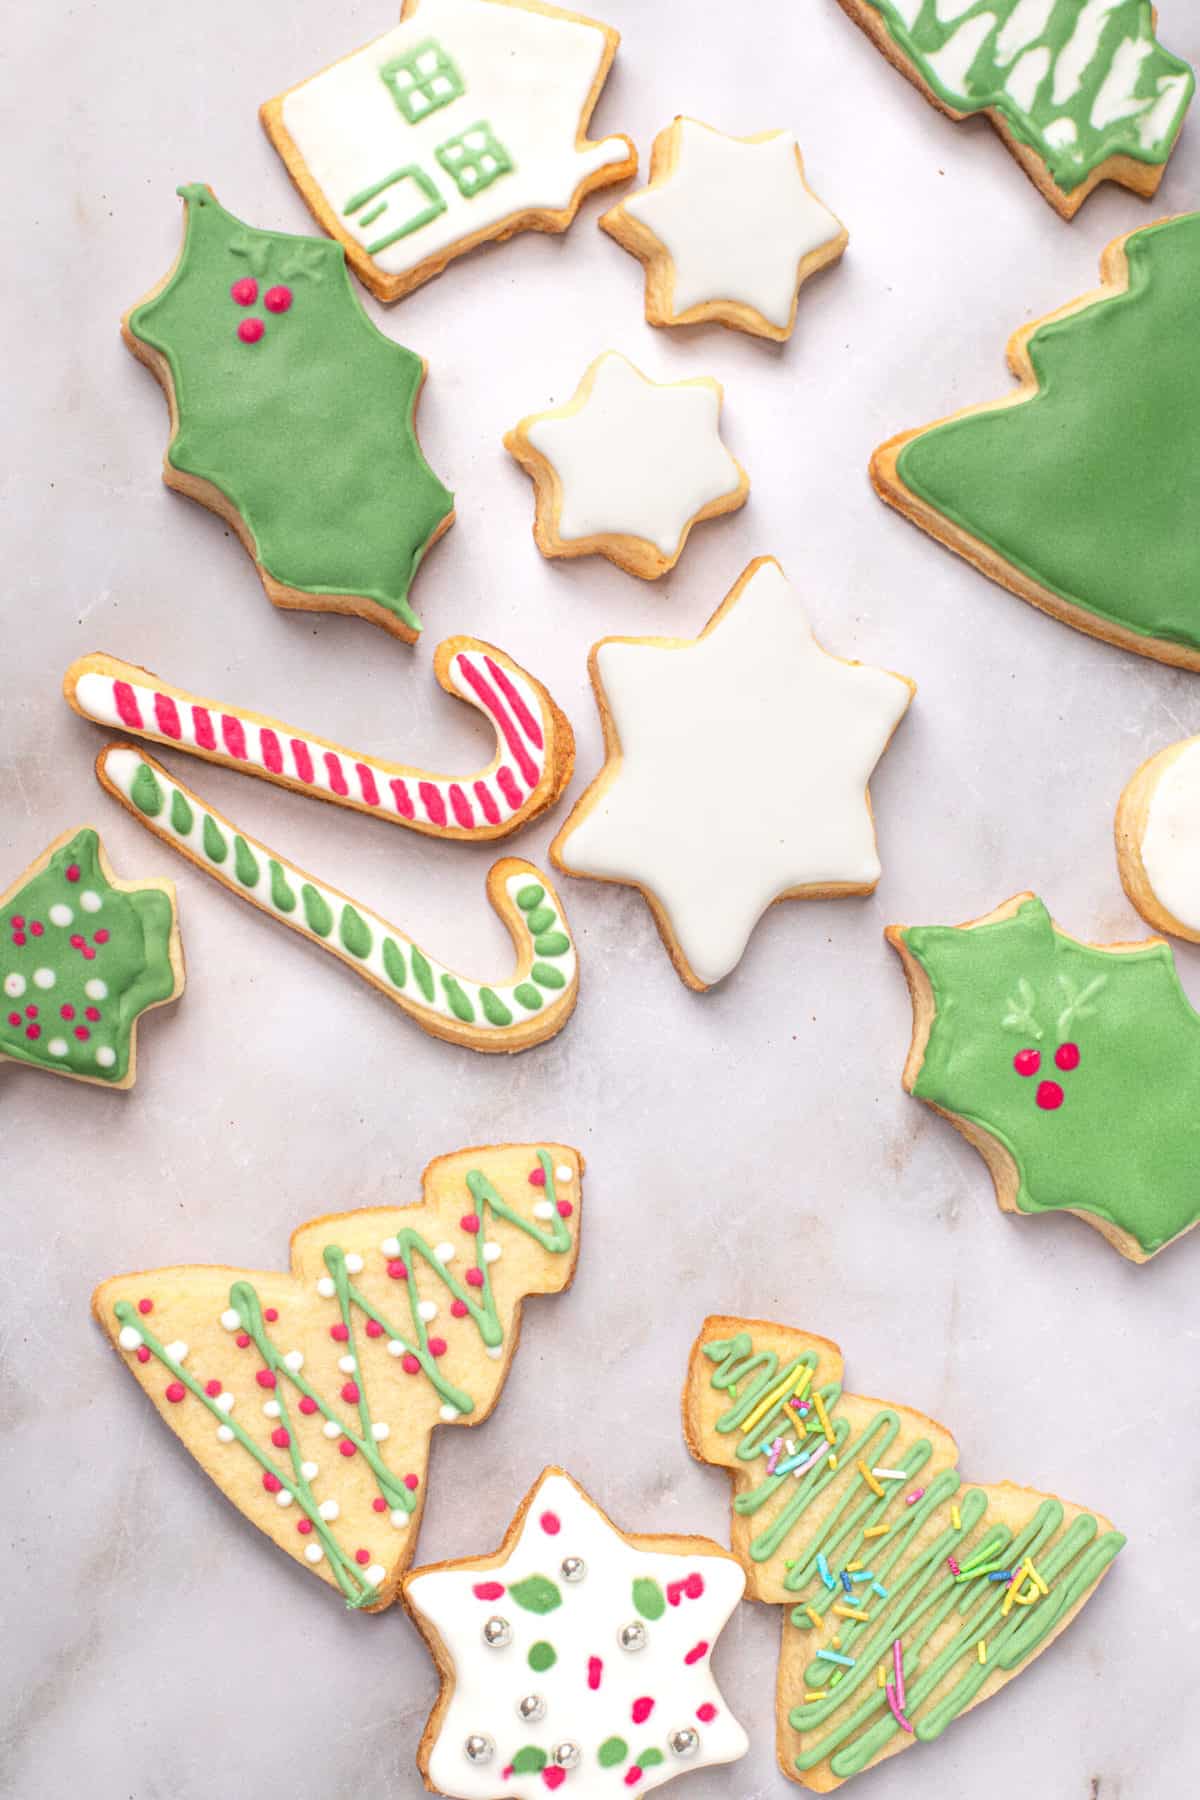 gluten free sugar cookies decorated for Christmas and scattered on a table 